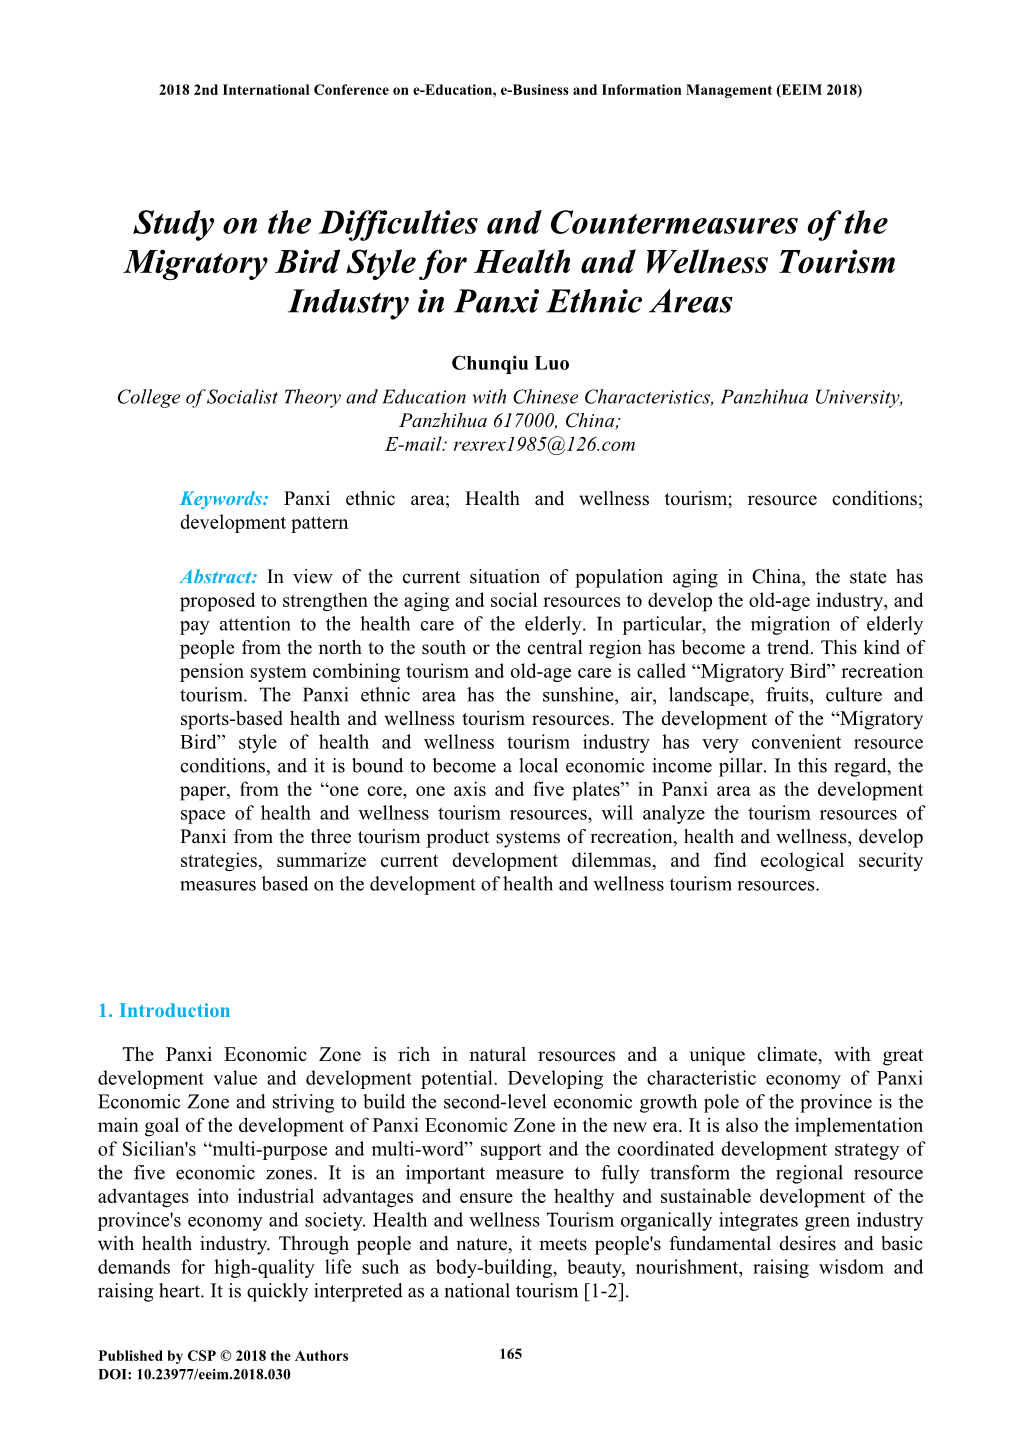 Study on the Difficulties and Countermeasures of the Migratory Bird Style for Health and Wellness Tourism Industry in Panxi Ethnic Areas